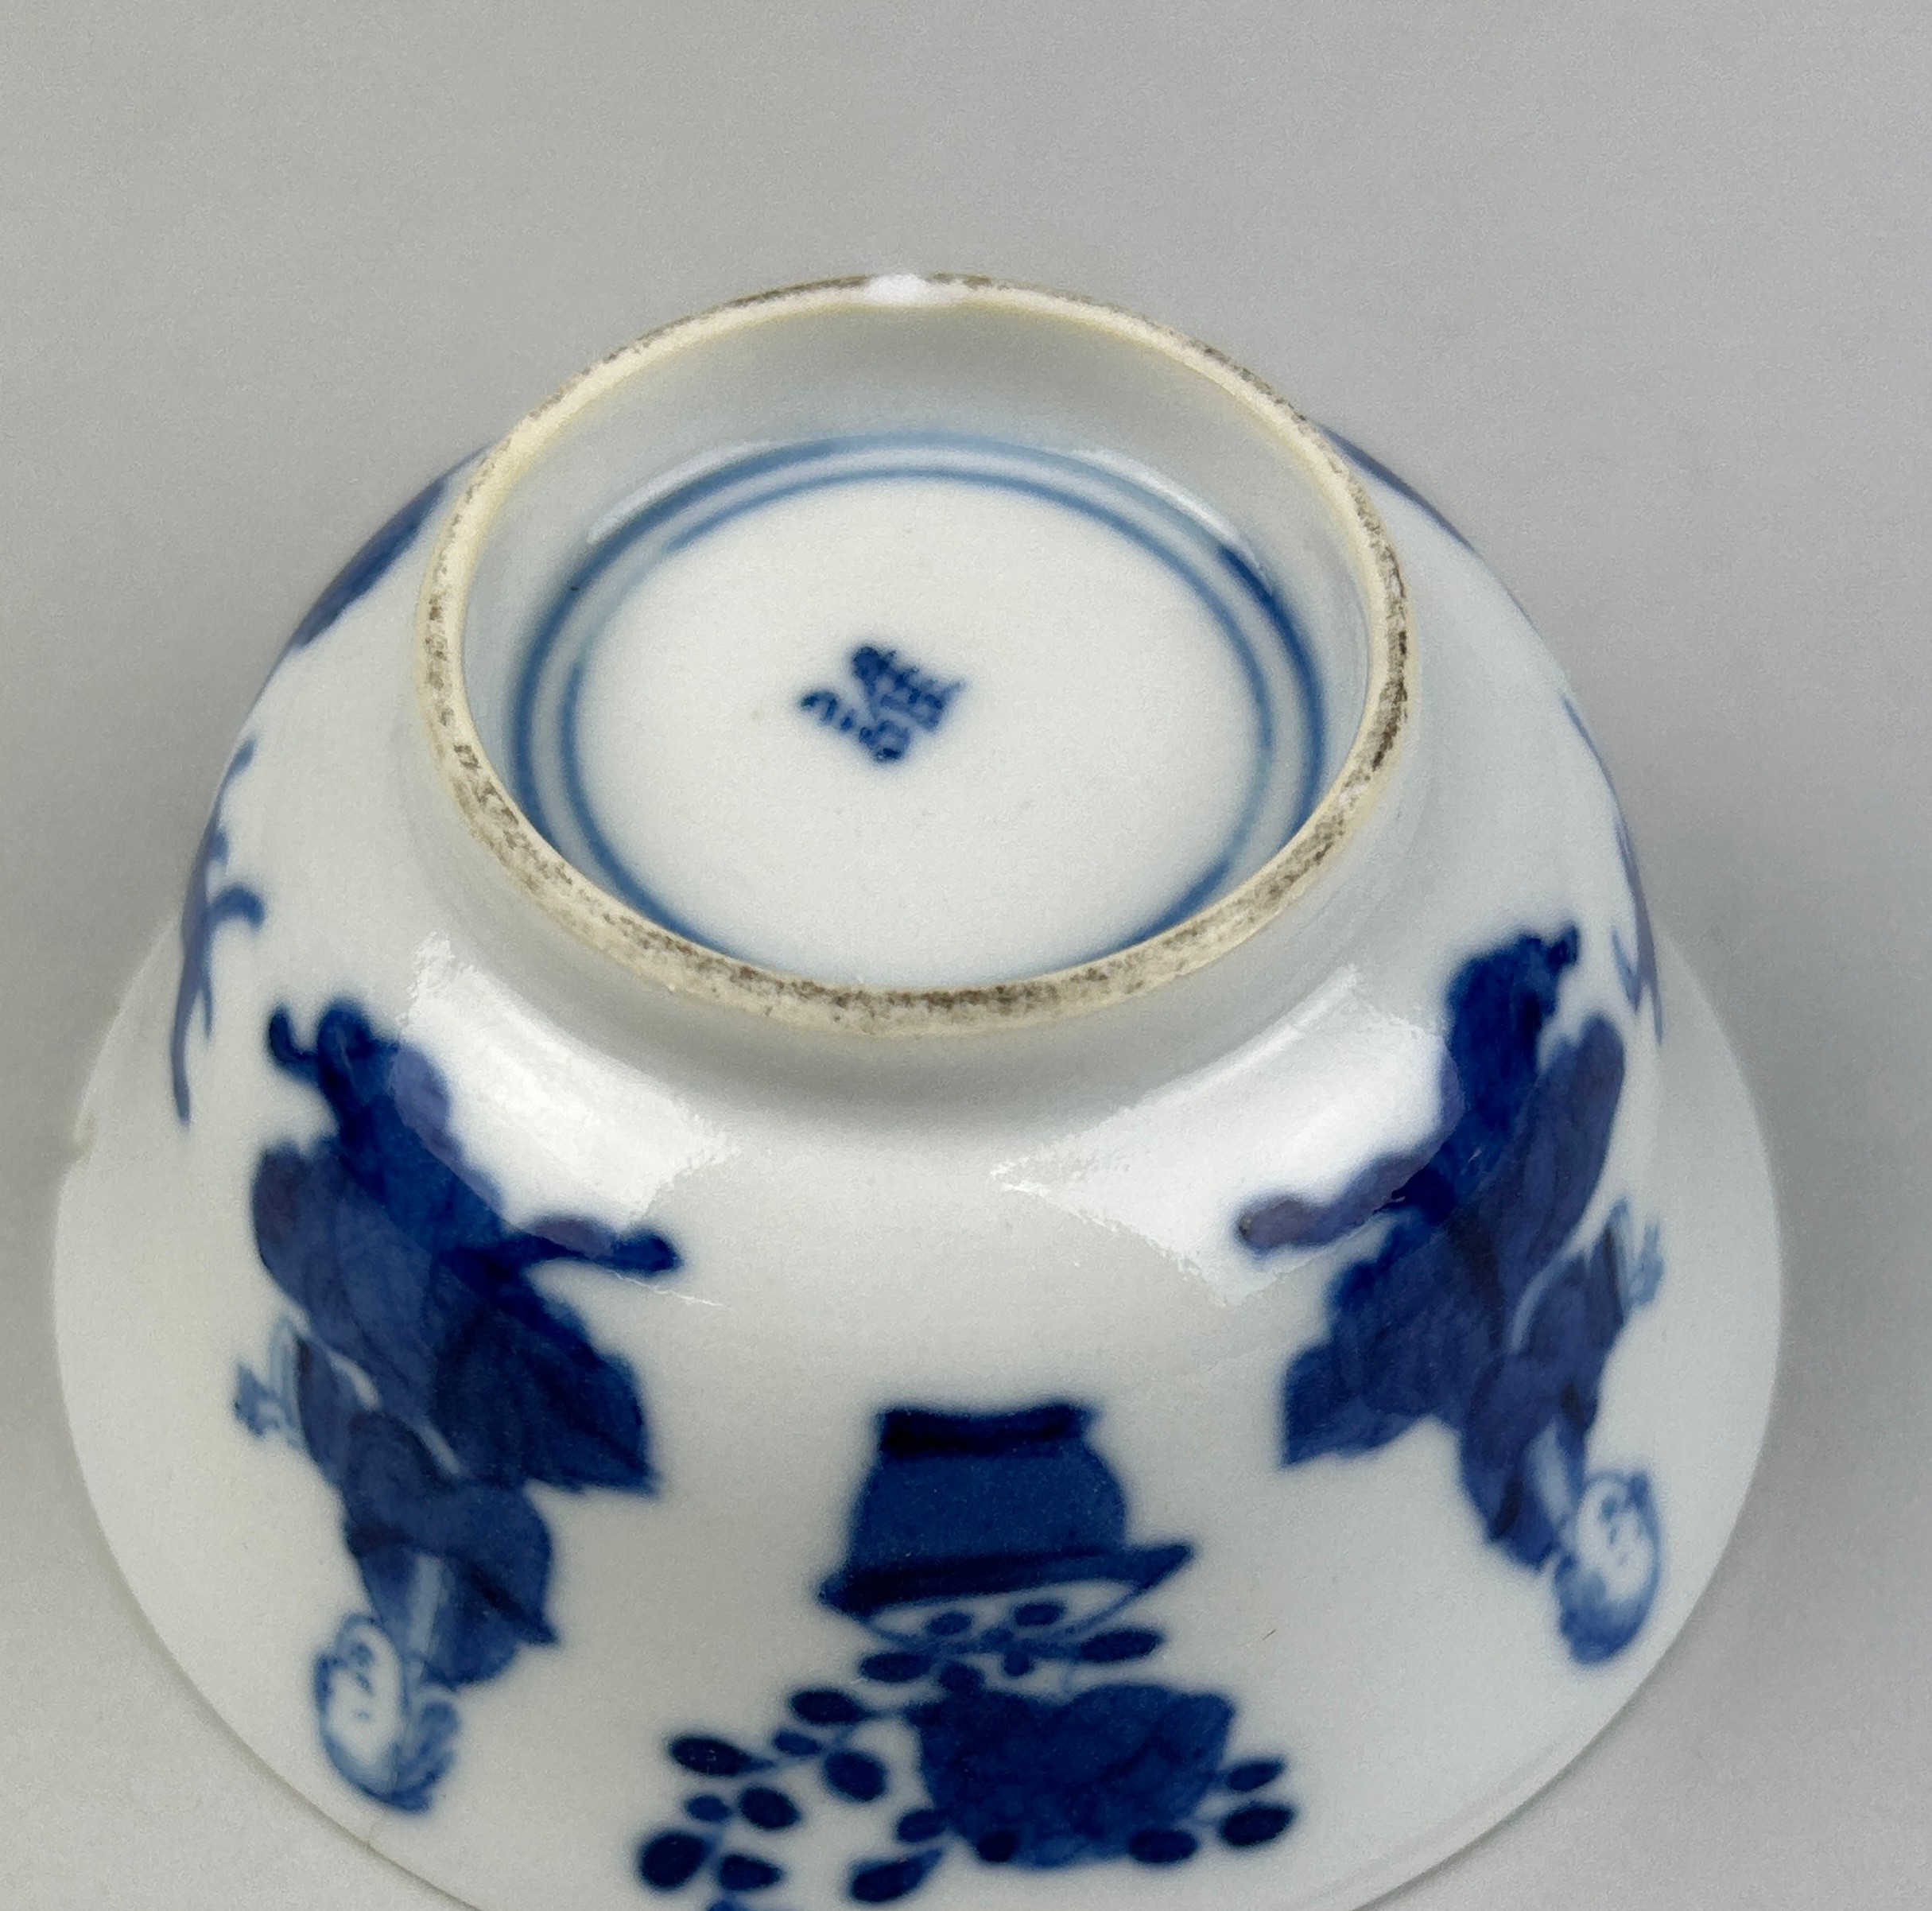 A CHINESE KANGXI PERIOD BOWL DECORATED WITH FIGURES, DOGS AND FLOWERS, 8cm x 8cm x 4.2cm - Image 6 of 6